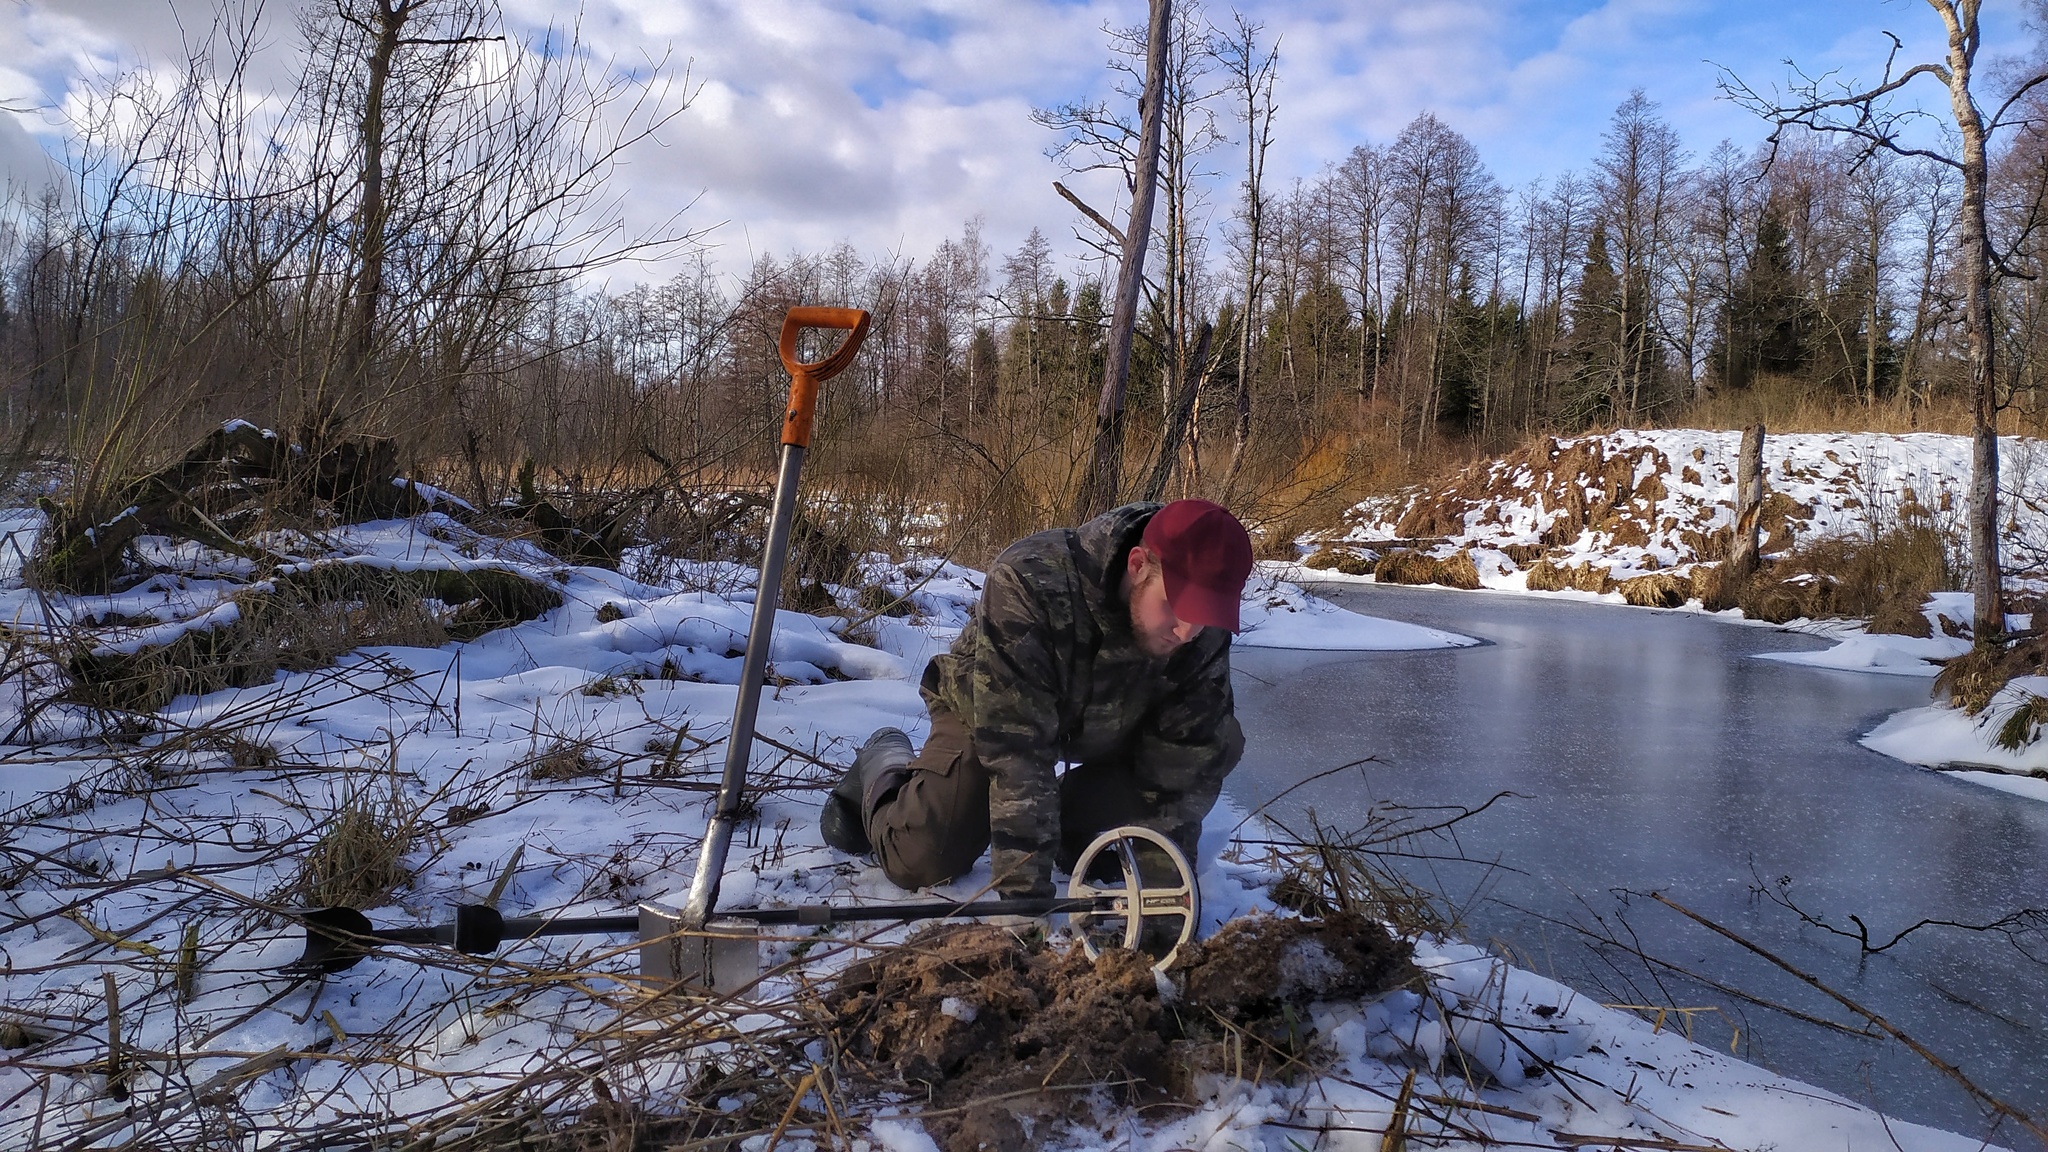 Search for gold near the old mill - Longpost, Video, Adventures, Nature, Hobby, Metal detector, Treasure hunt, Treasure, Search, My